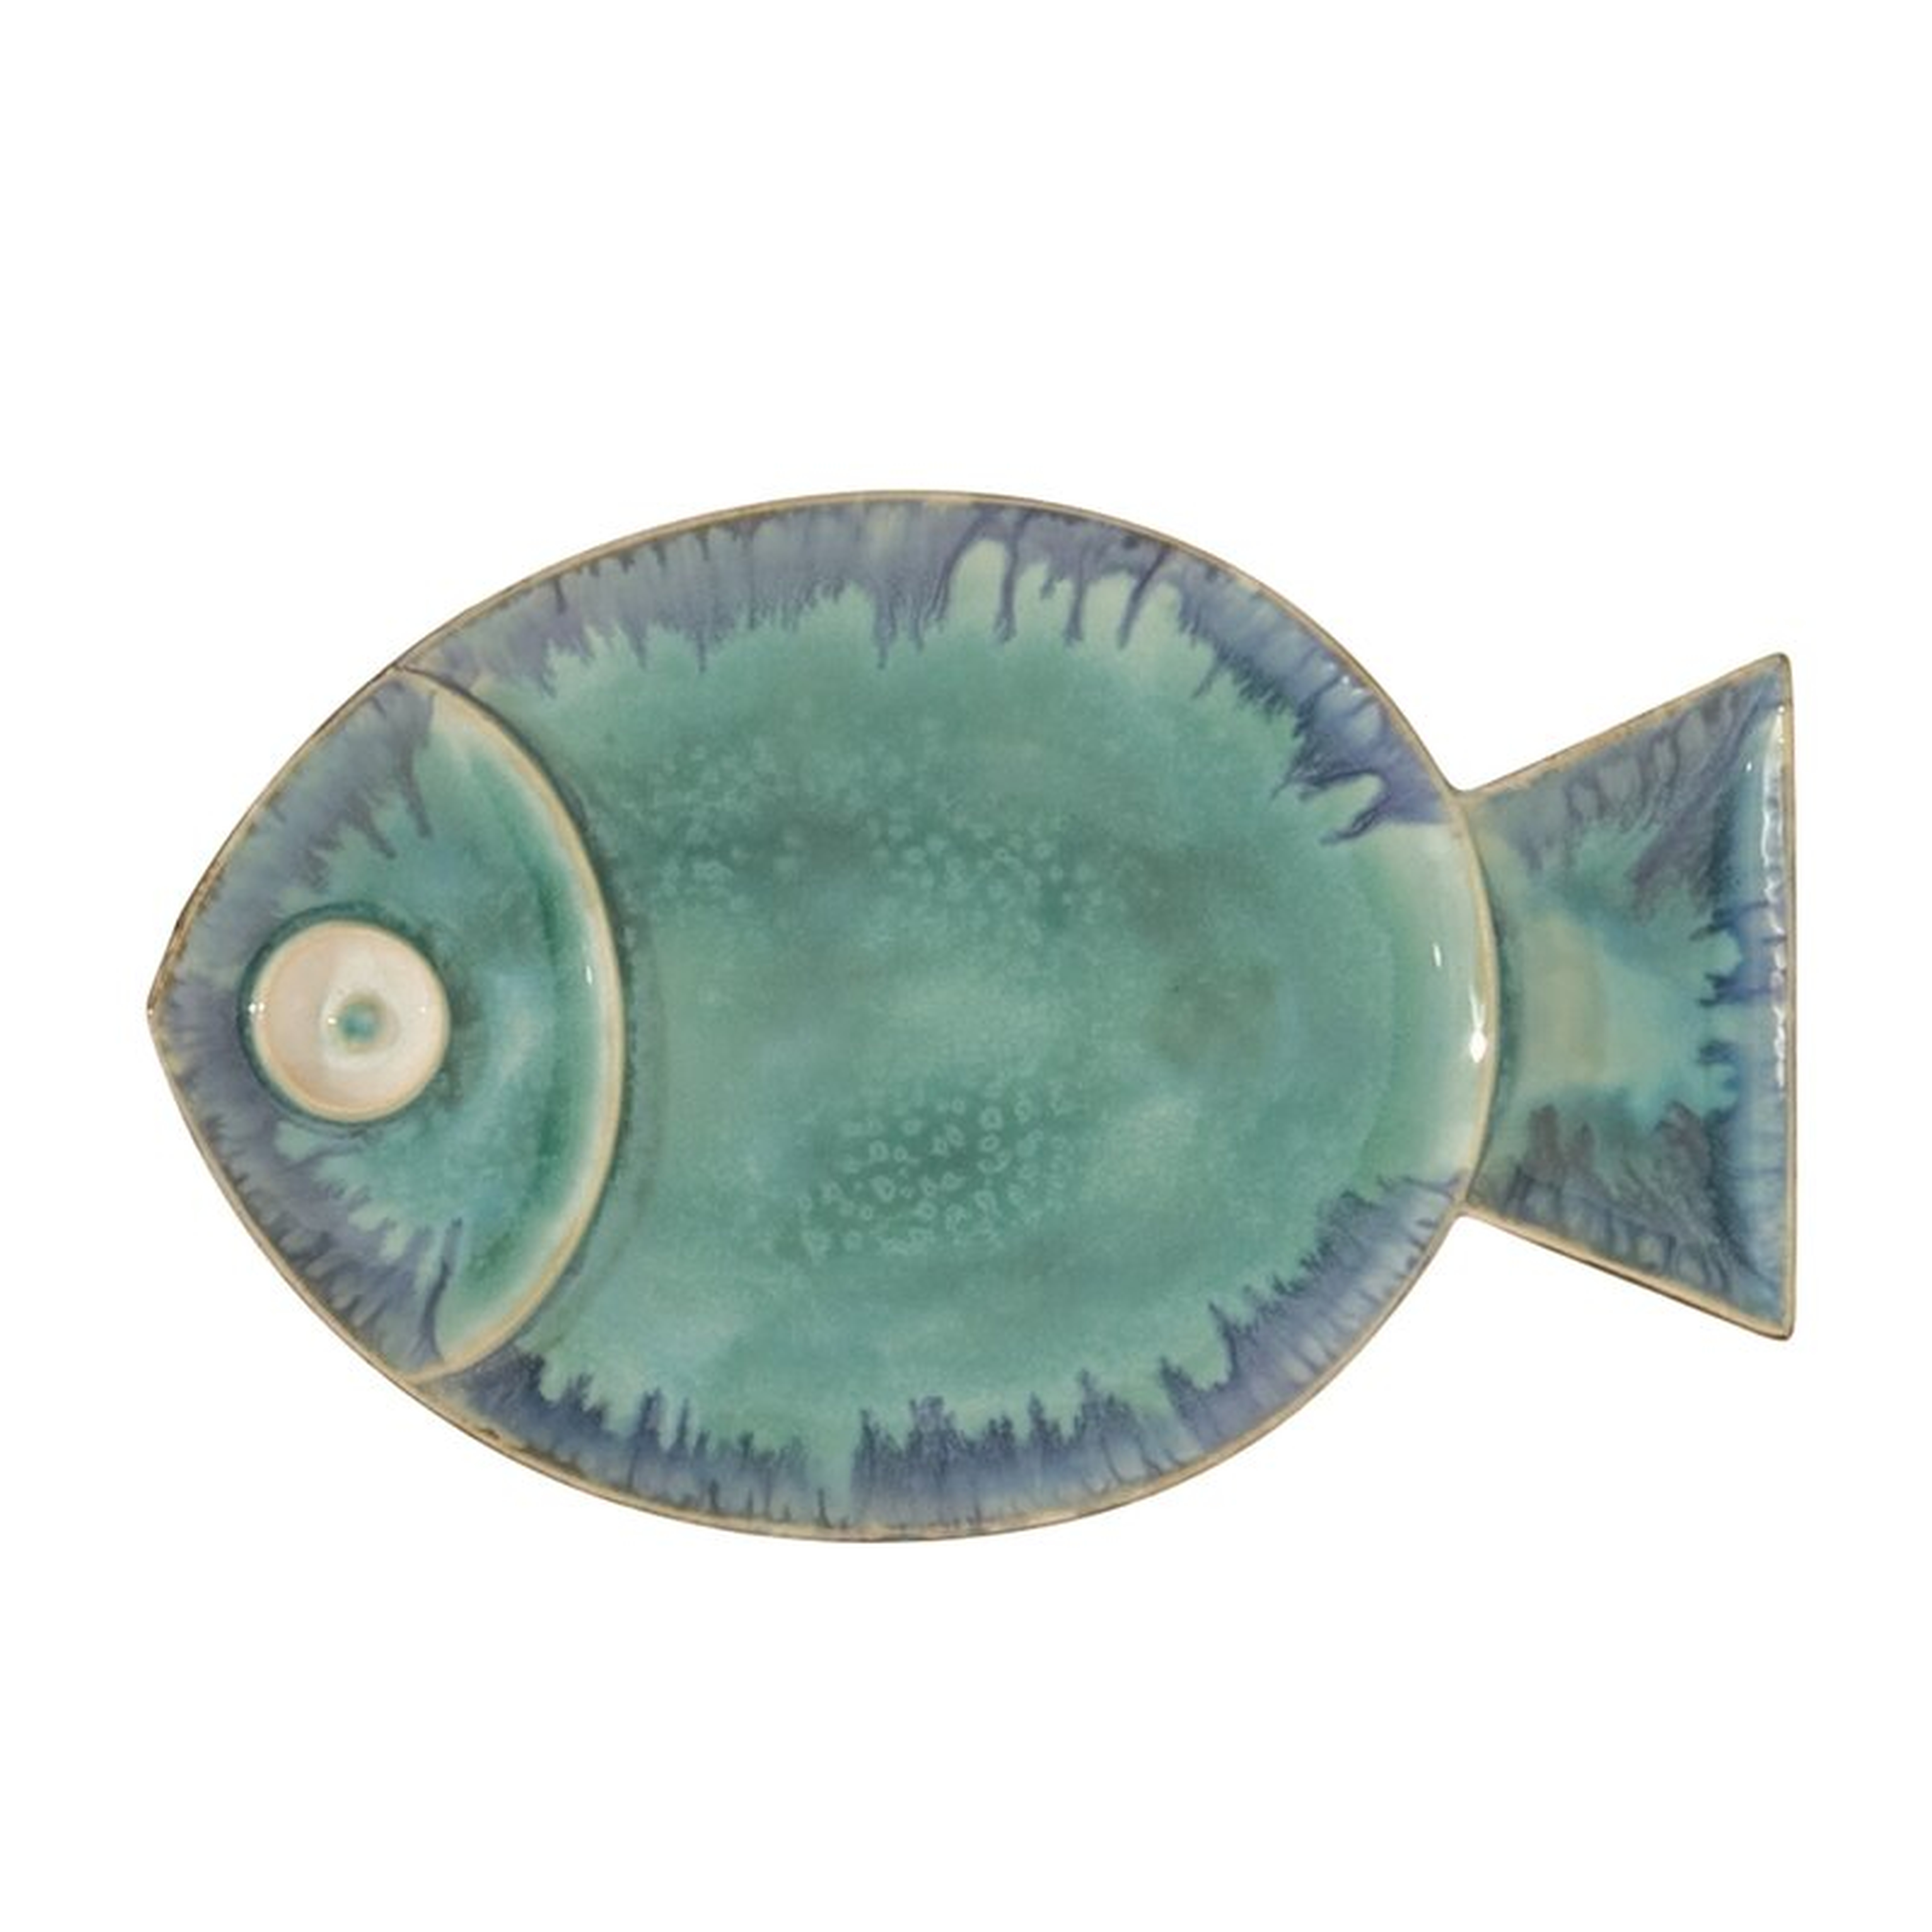 Blue Fish Plate Wall Décor - Large - Perigold